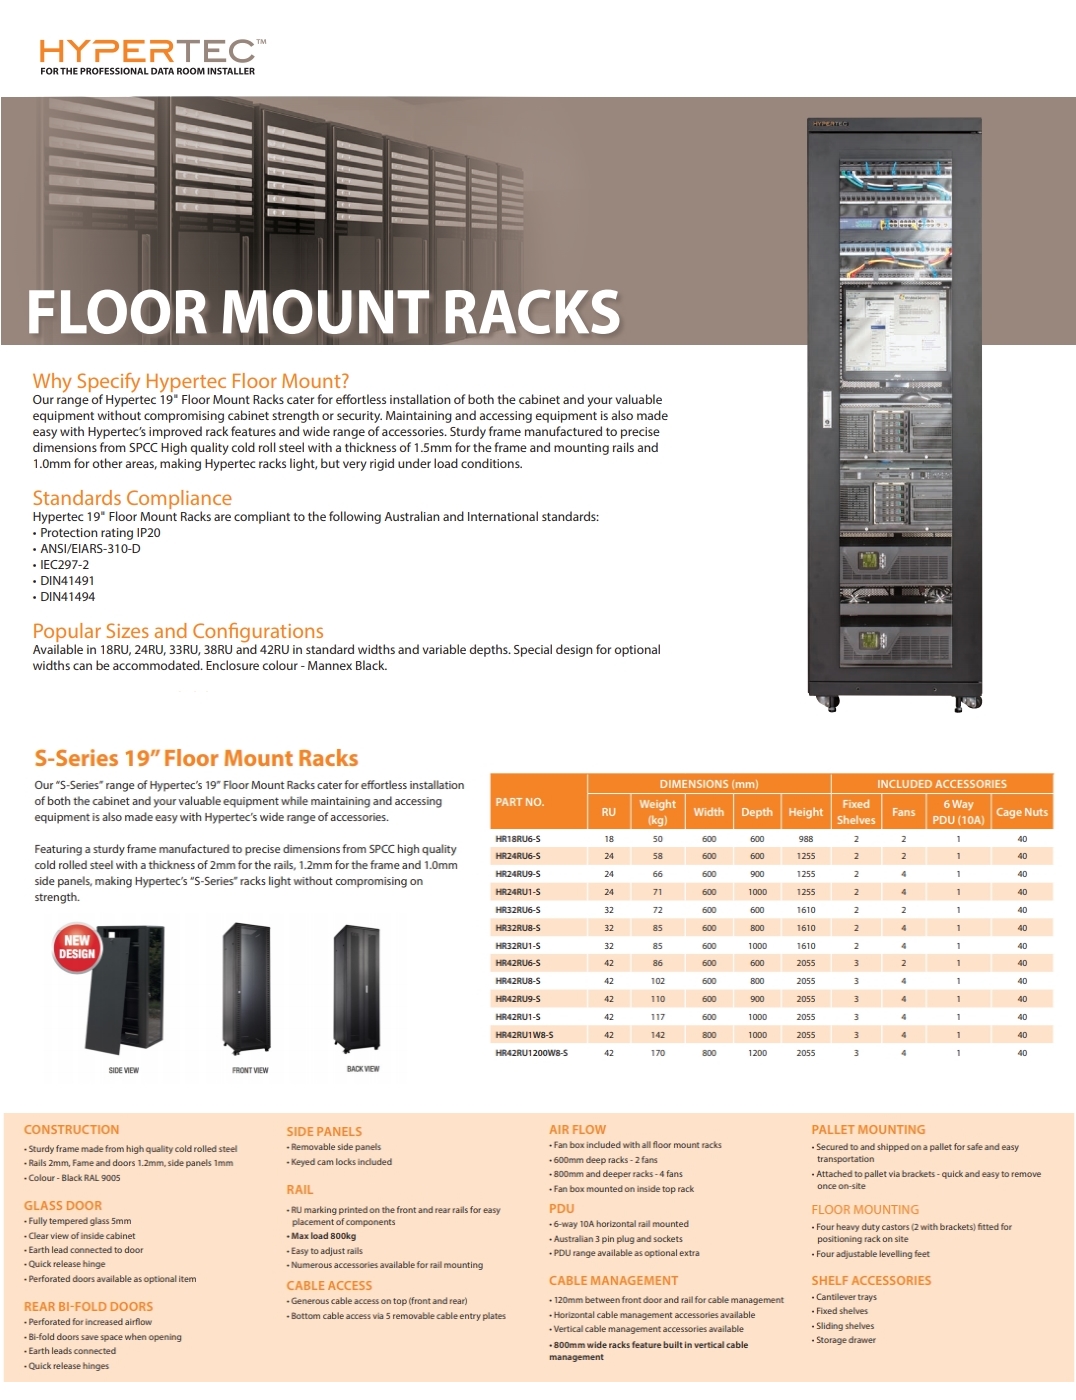 A large marketing image providing additional information about the product Hypertec Floor Mount 19" Enclosed 24RU (600W X 600D X 1255H) Server Cabinet - Additional alt info not provided